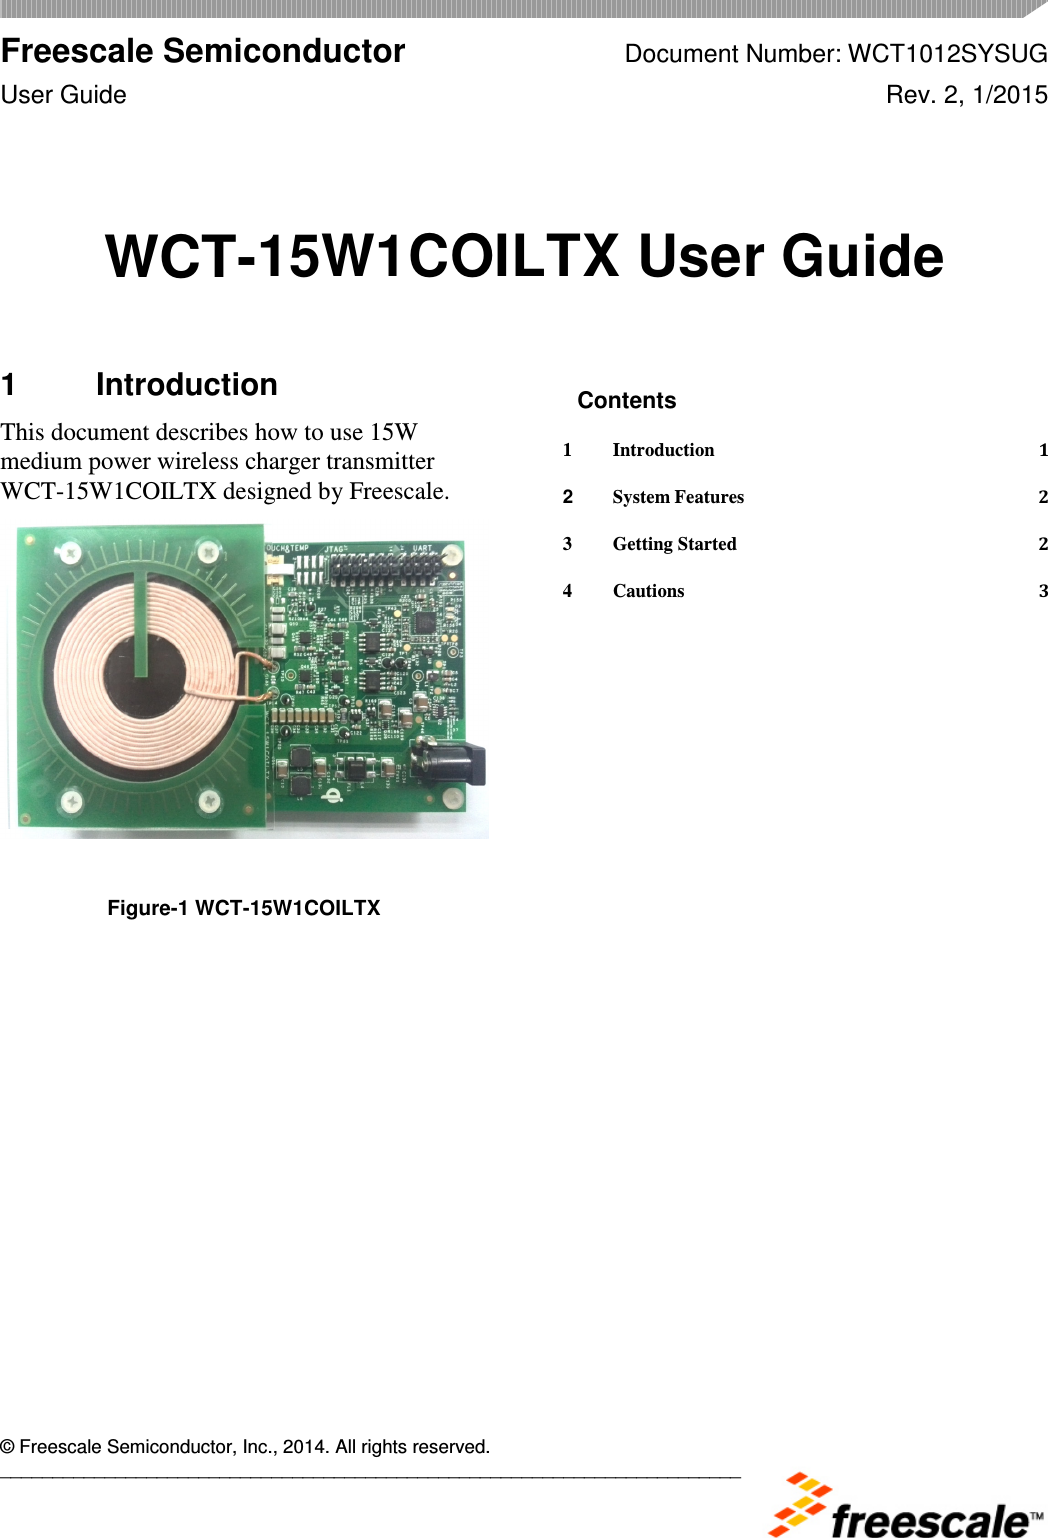  Freescale Semiconductor Document Number: WCT1012SYSUG User Guide  Rev. 2, 1/2015      © Freescale Semiconductor, Inc., 2014. All rights reserved. _______________________________________________________________________ WCT-15W1COILTX User Guide  1  Introduction This document describes how to use 15W medium power wireless charger transmitter WCT-15W1COILTX designed by Freescale.    Figure-1 WCT-15W1COILTX  Contents 1 Introduction  1 2 System Features  2 3 Getting Started  2 4 Cautions  3  